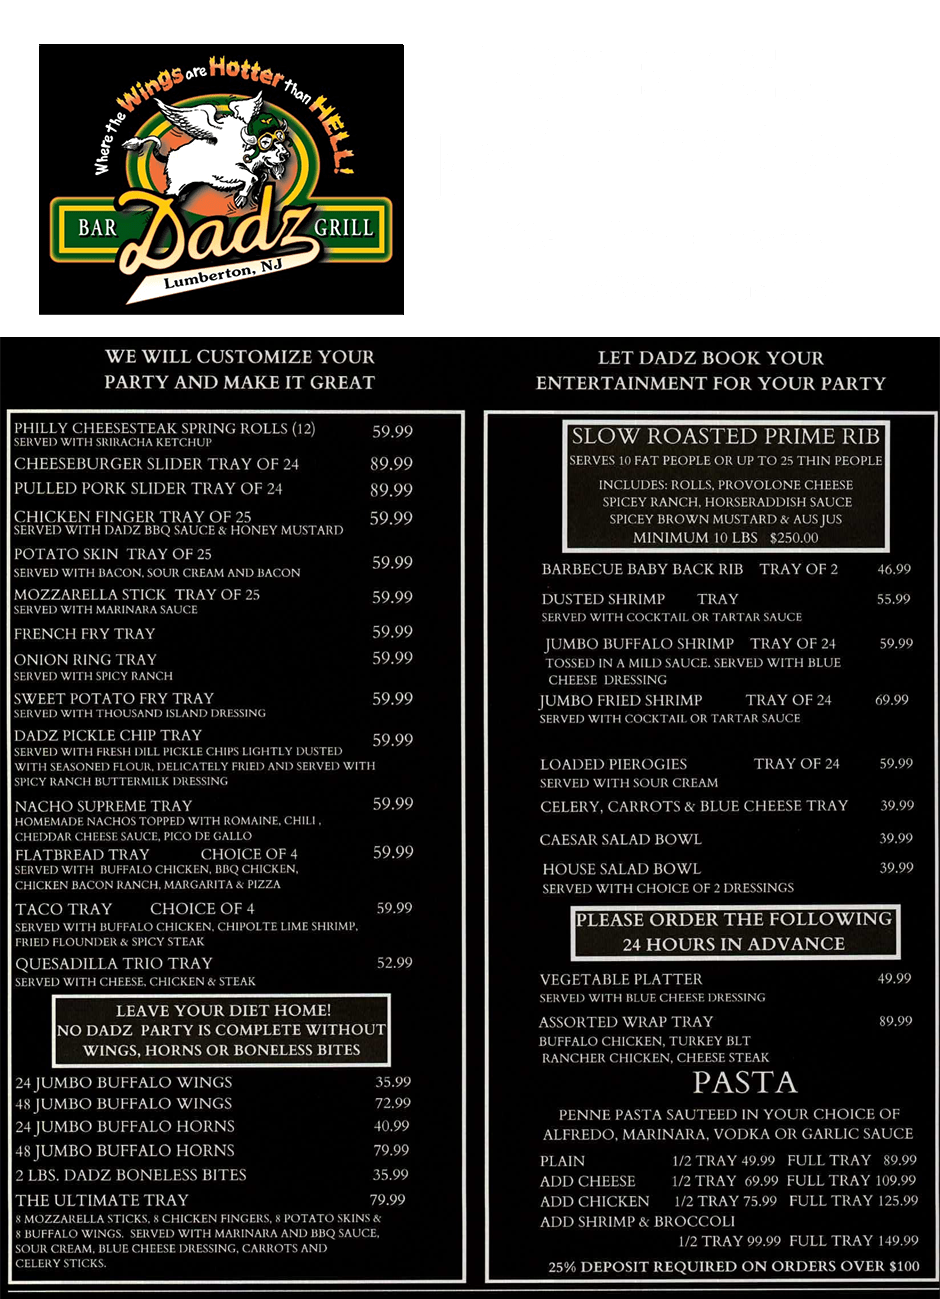 Dadz bar and grill Party Menu